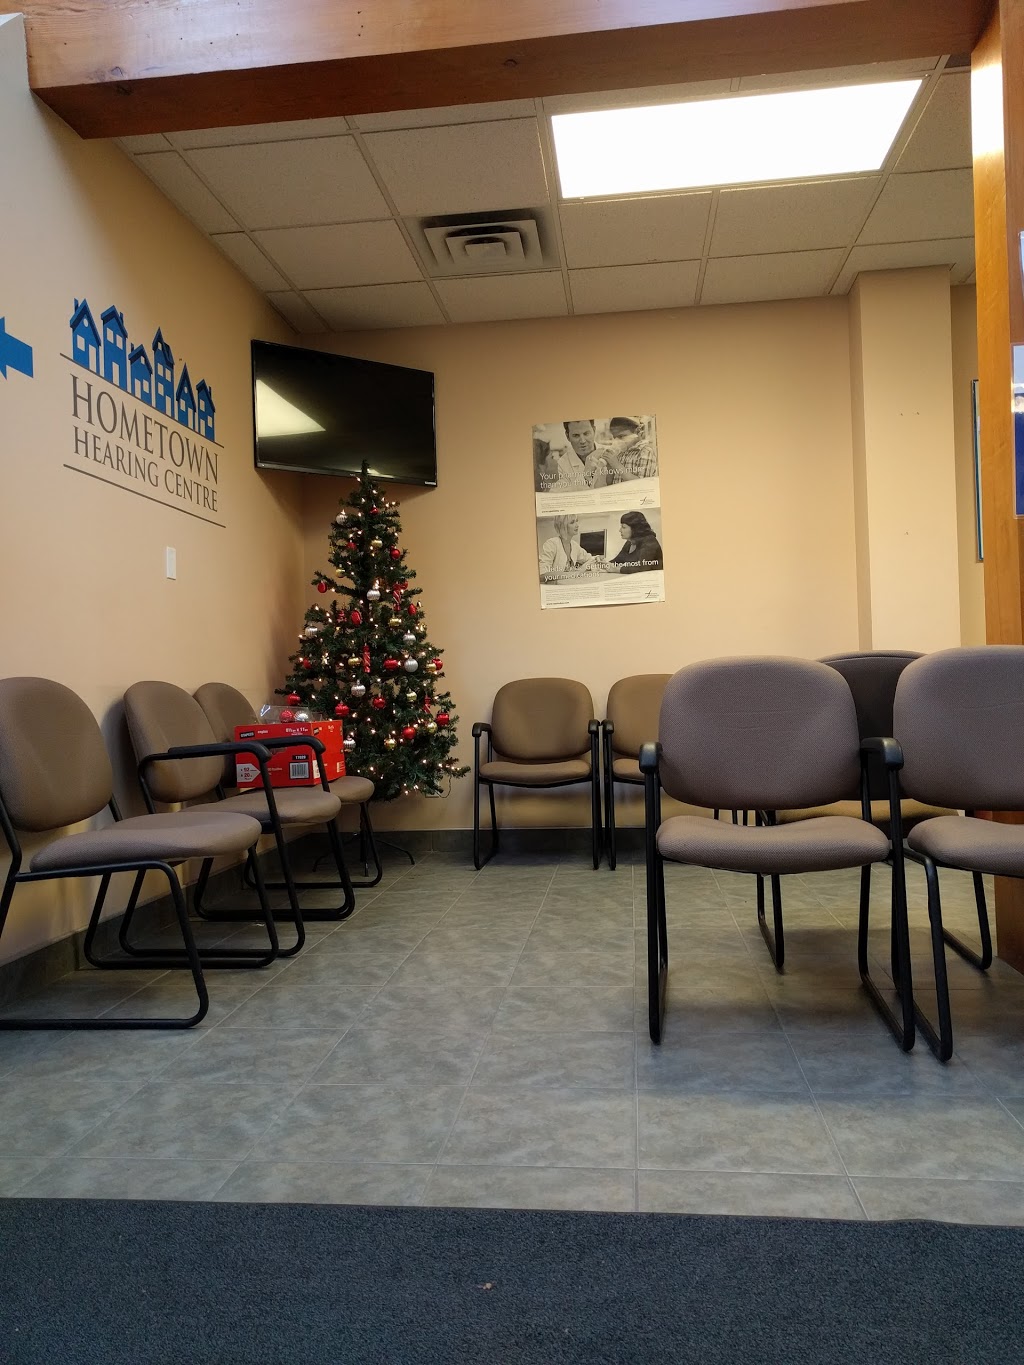 The Forbes Park Medical Centre | health | 26 Forbes St, Cambridge, ON N3C 2E2, Canada | 5196584615 OR +1 519-658-4615